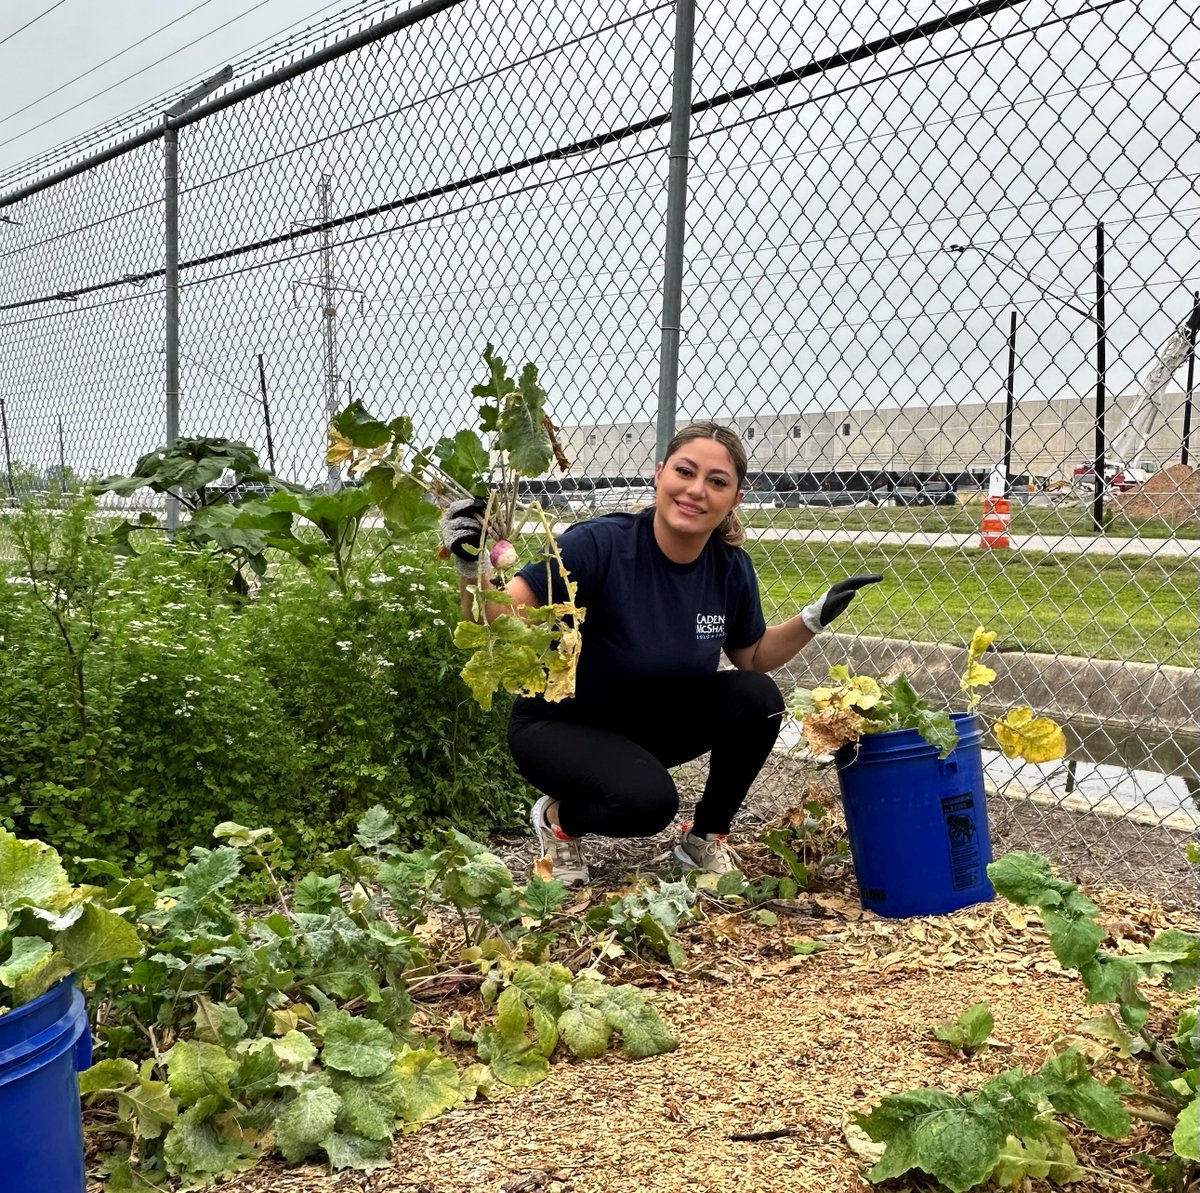 Last week, the San Antonio team had the pleasure of volunteering at the San Antonio Food Bank, where we planted, picked, and washed vegetables that will be distributed to the community. Thank you for having us! #OneCMC #WeBuildHereWeServeHere #FightingHungerFeedingHope